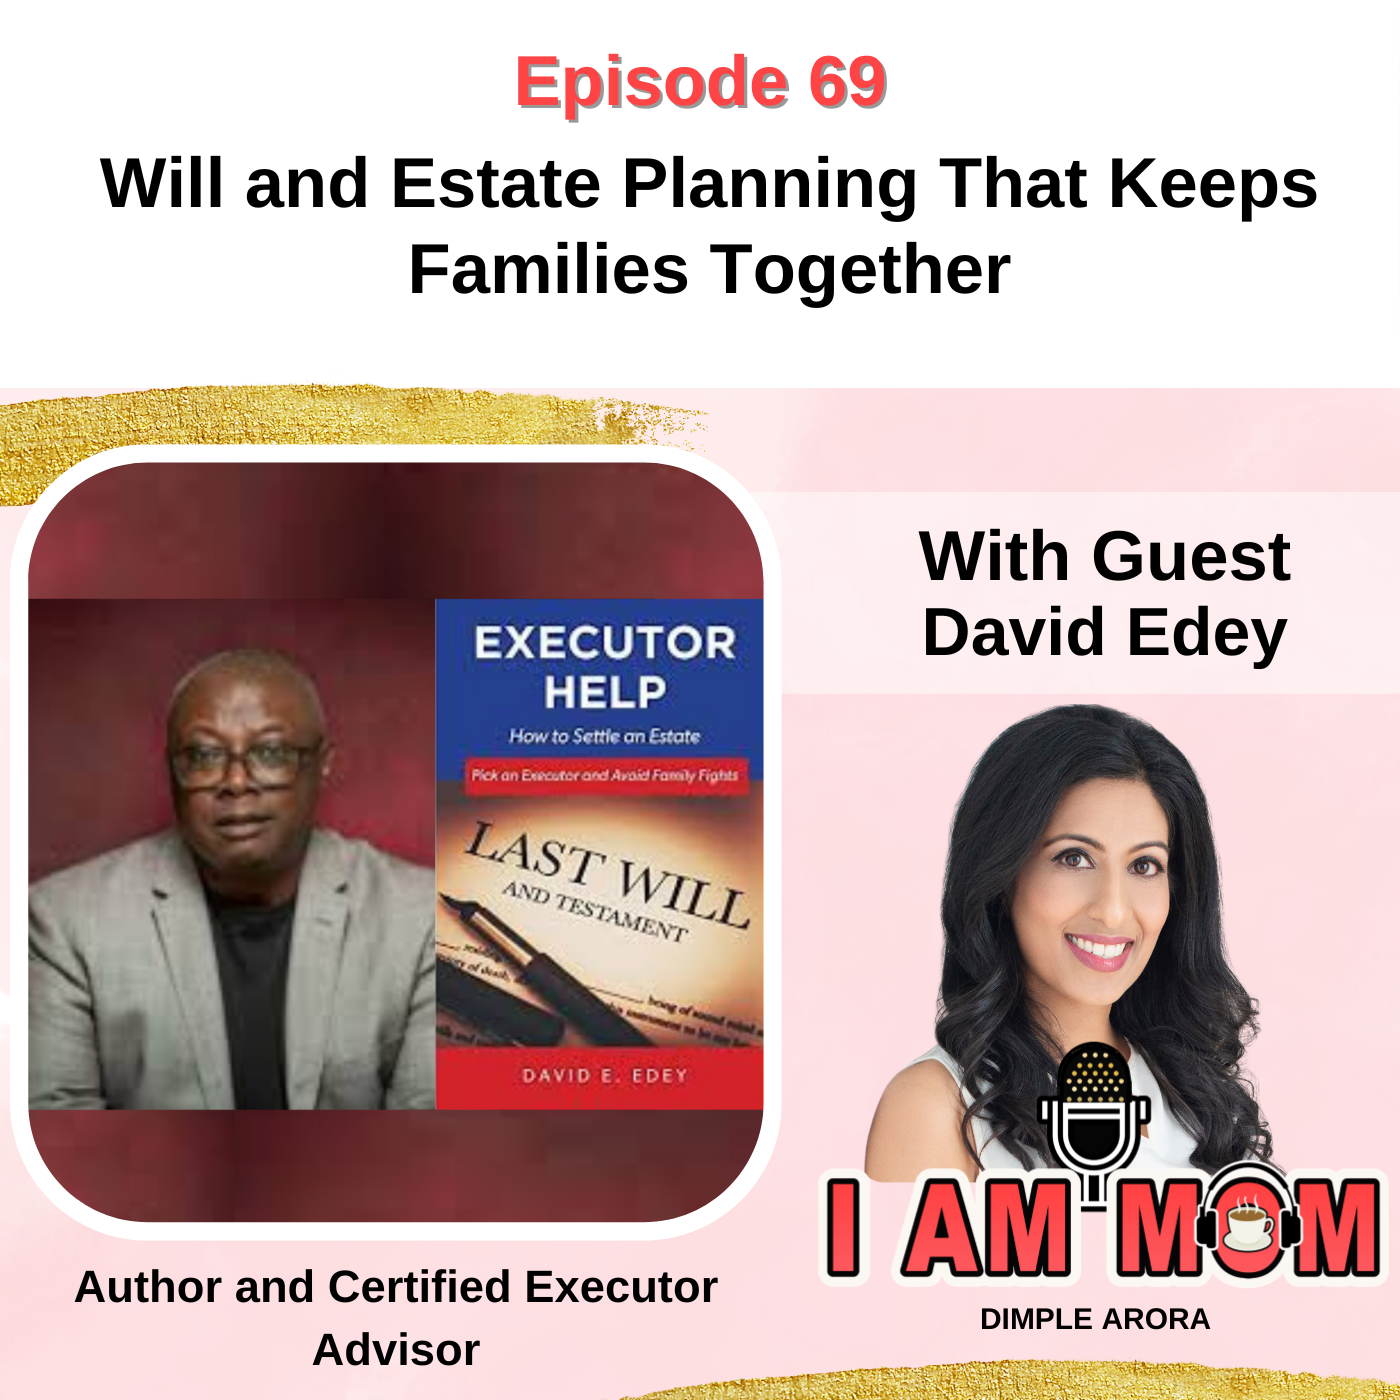 Ep 69 - Will and Estate Planning That Keeps Families Together With Guest David Edey (Author and Certified Executor Advisor)